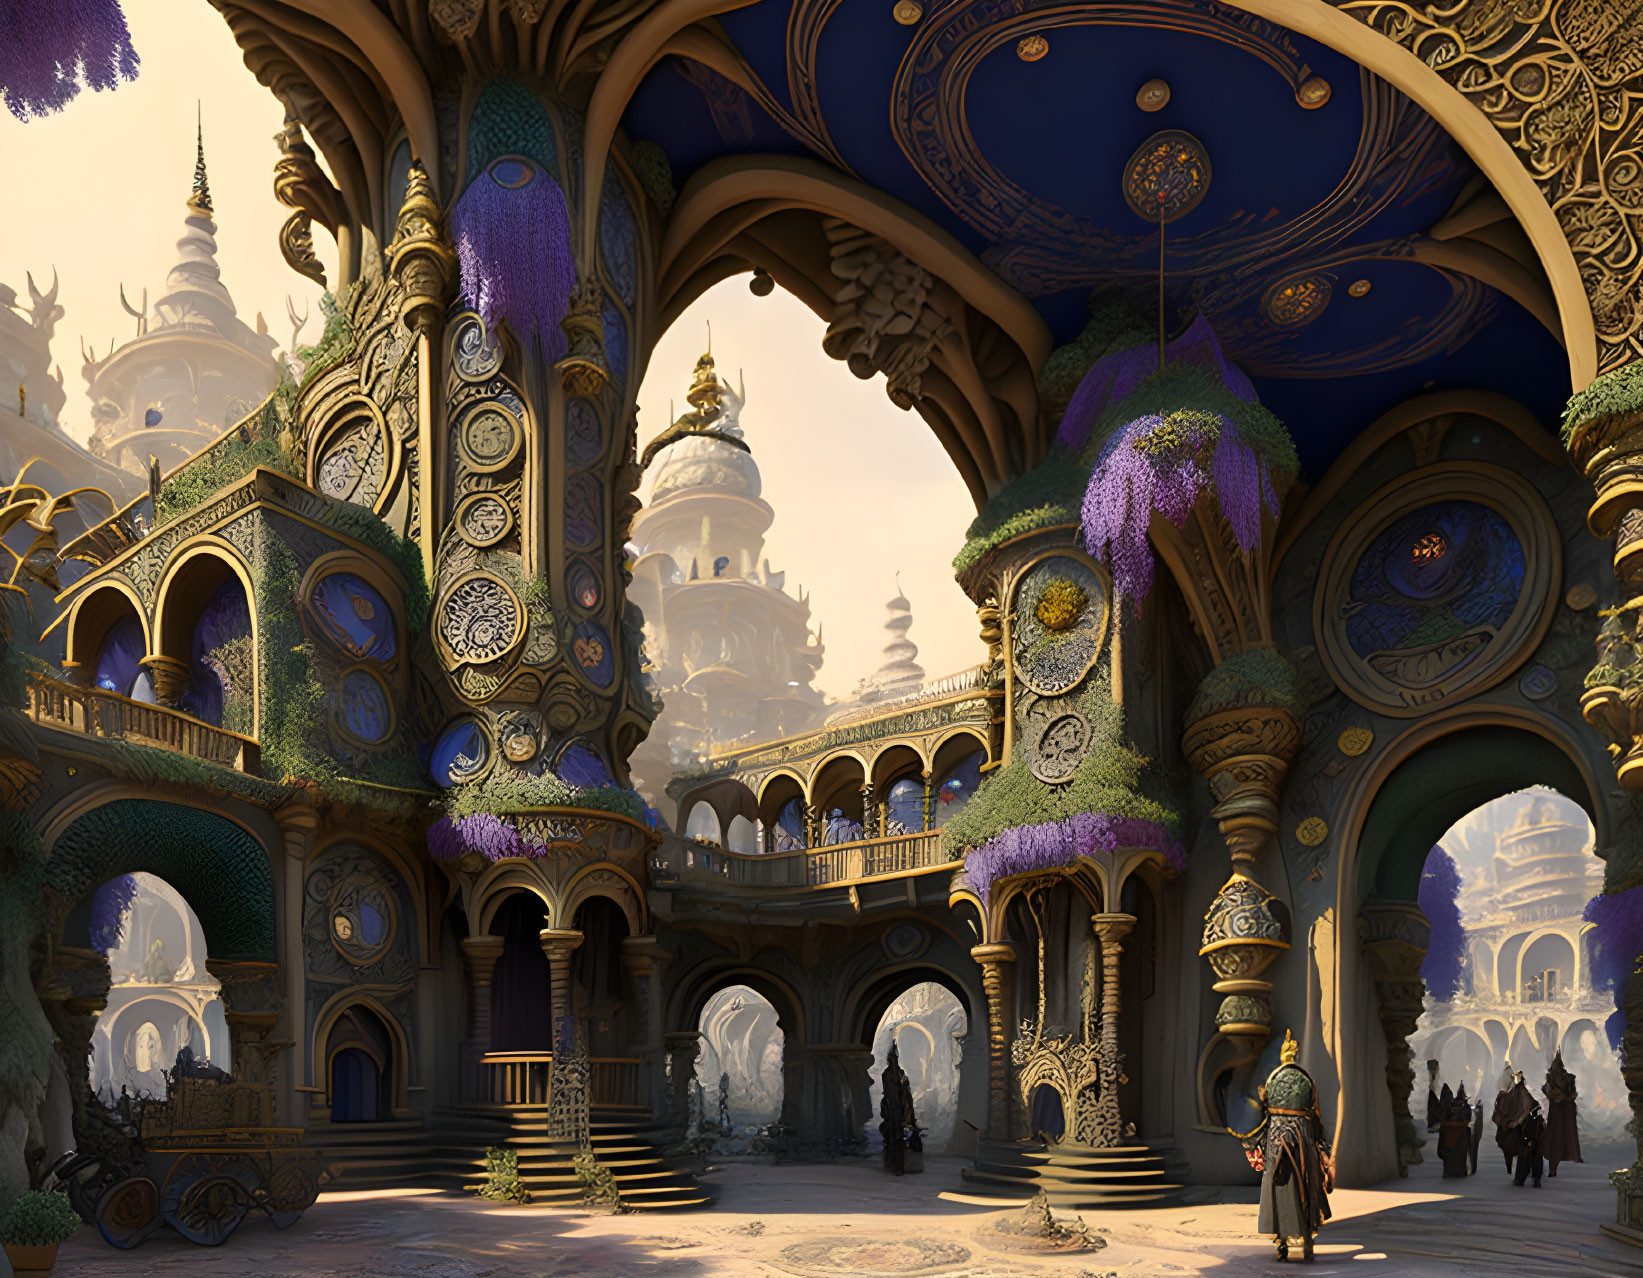 Ornate palace with arches, intricate patterns, hanging gardens, and lone figure.